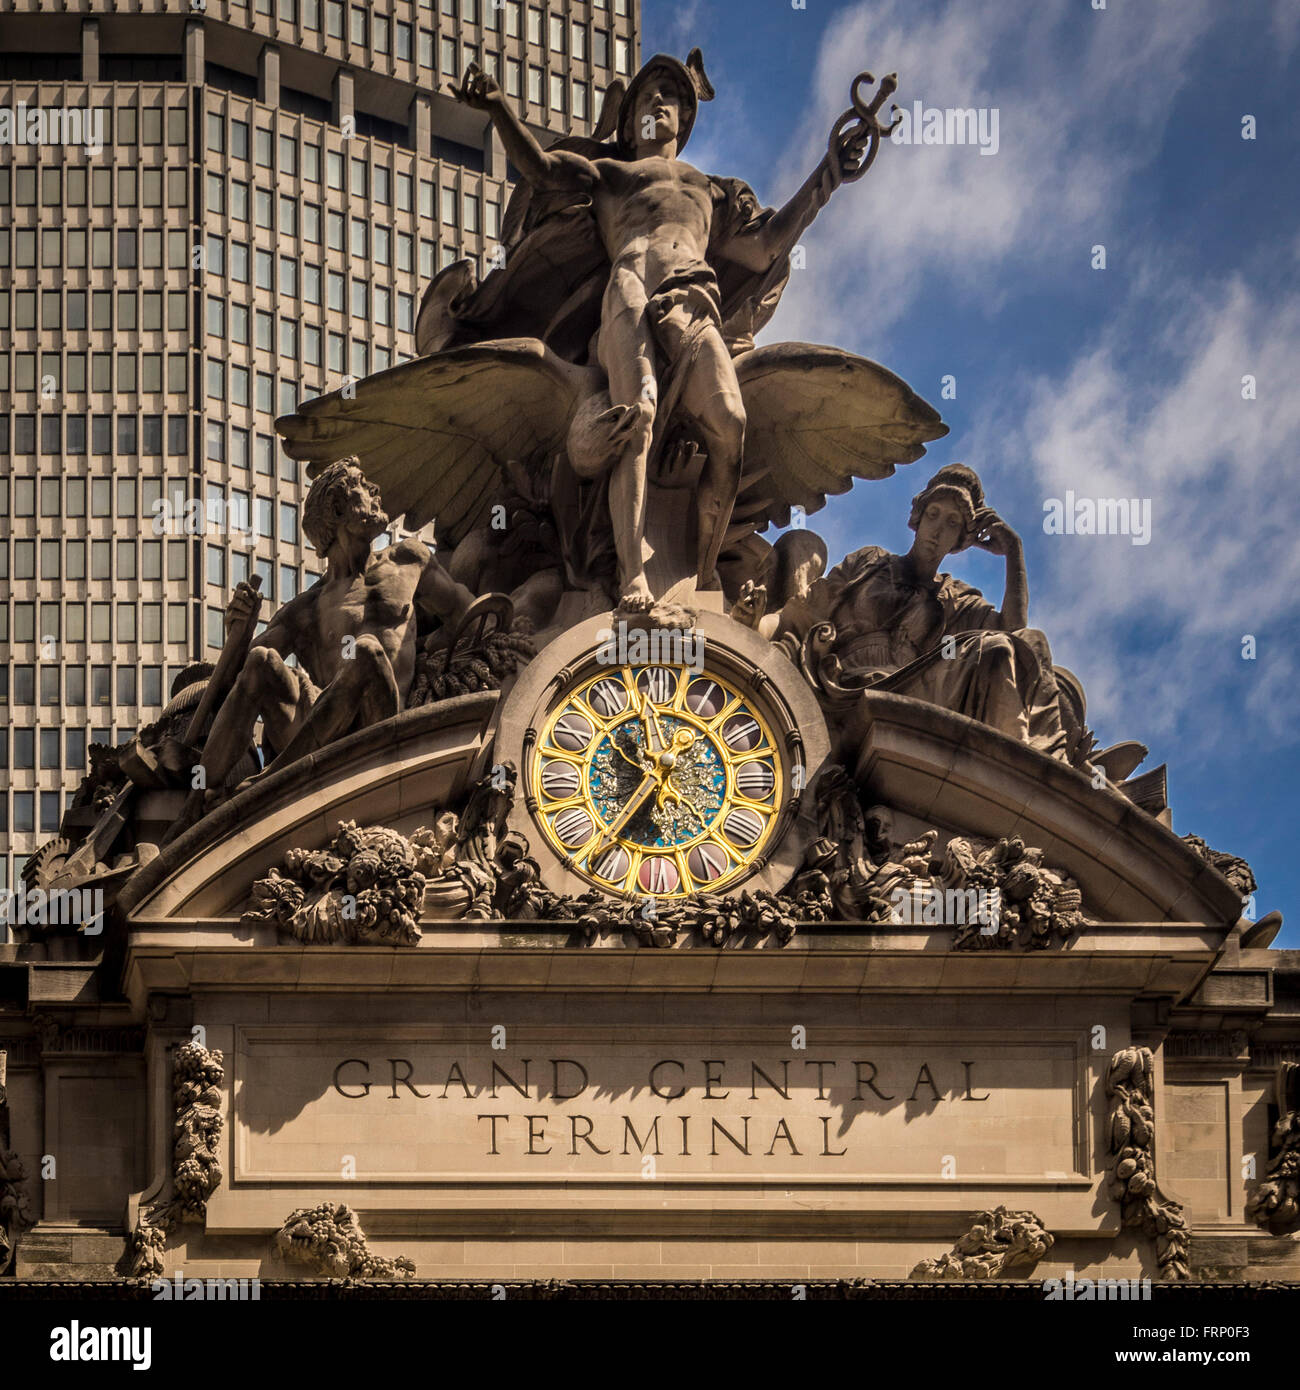 Grand Central Terminal train station facade with clock, New York City, USA. Stock Photo